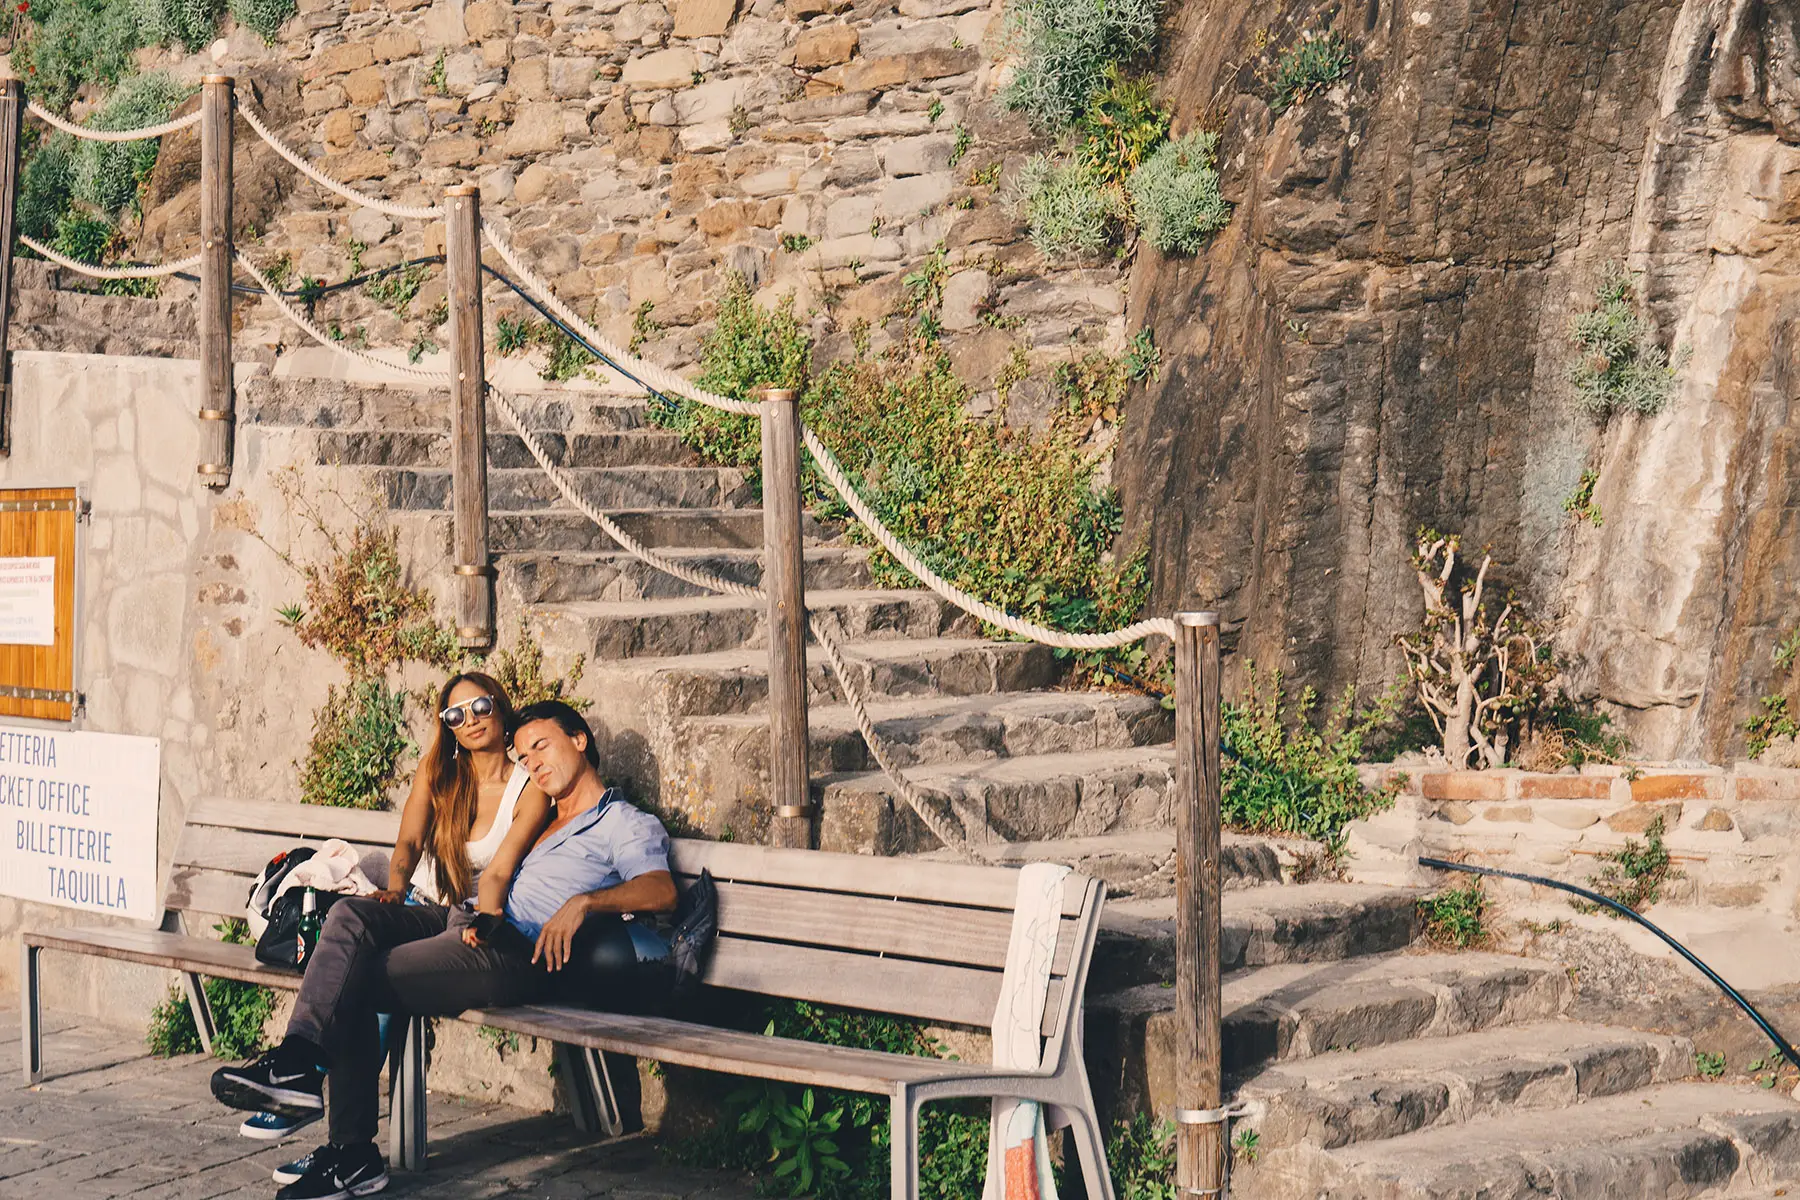 A couple on a bench in Cinqueterre, Italy